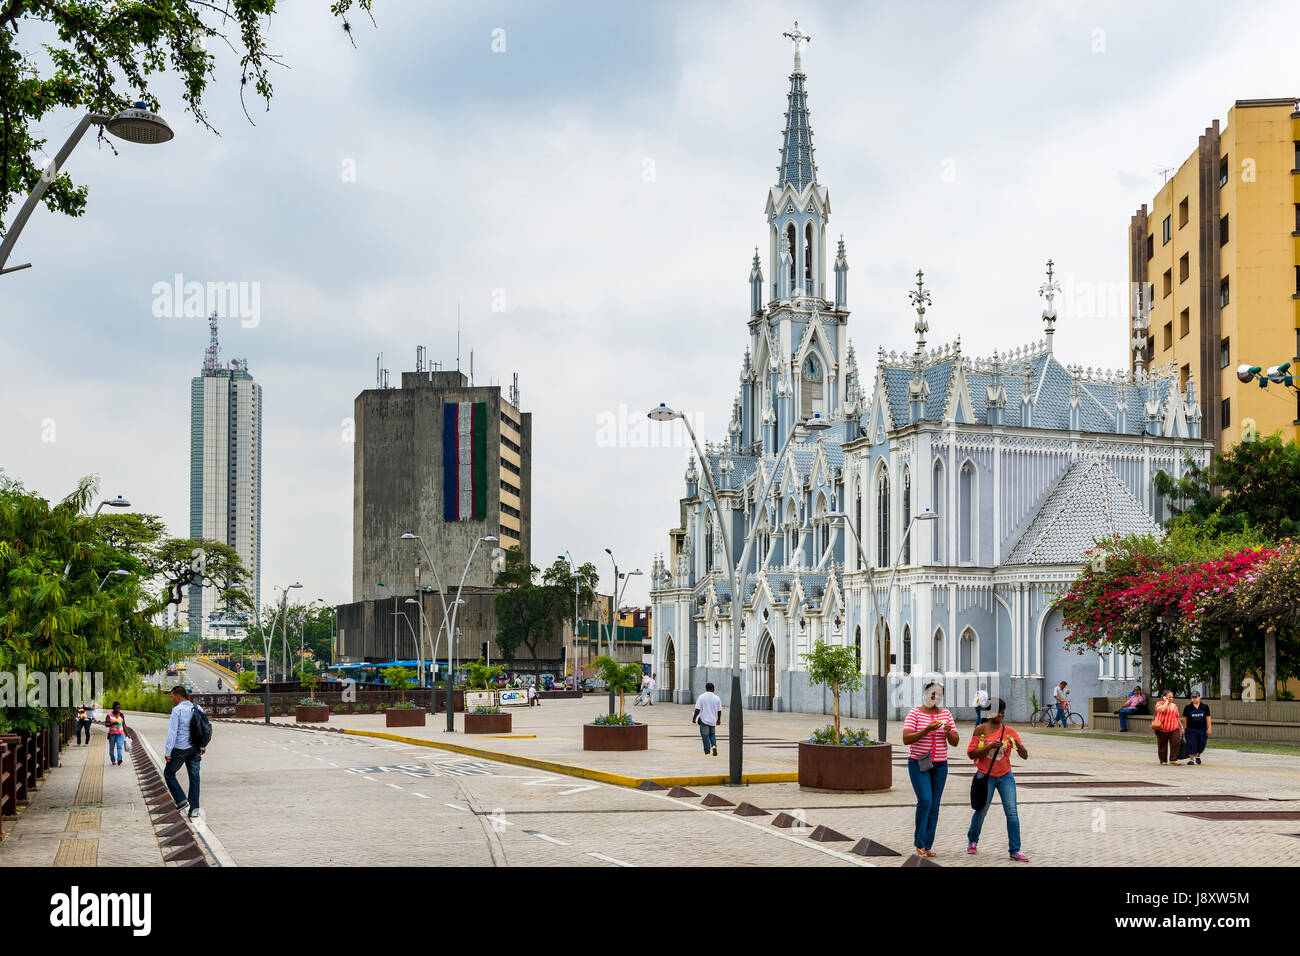 Cali, Colombia - February 6, 2014: People in a street in front of the La Ermita Church in city of Cali, Colombia Stock Photo